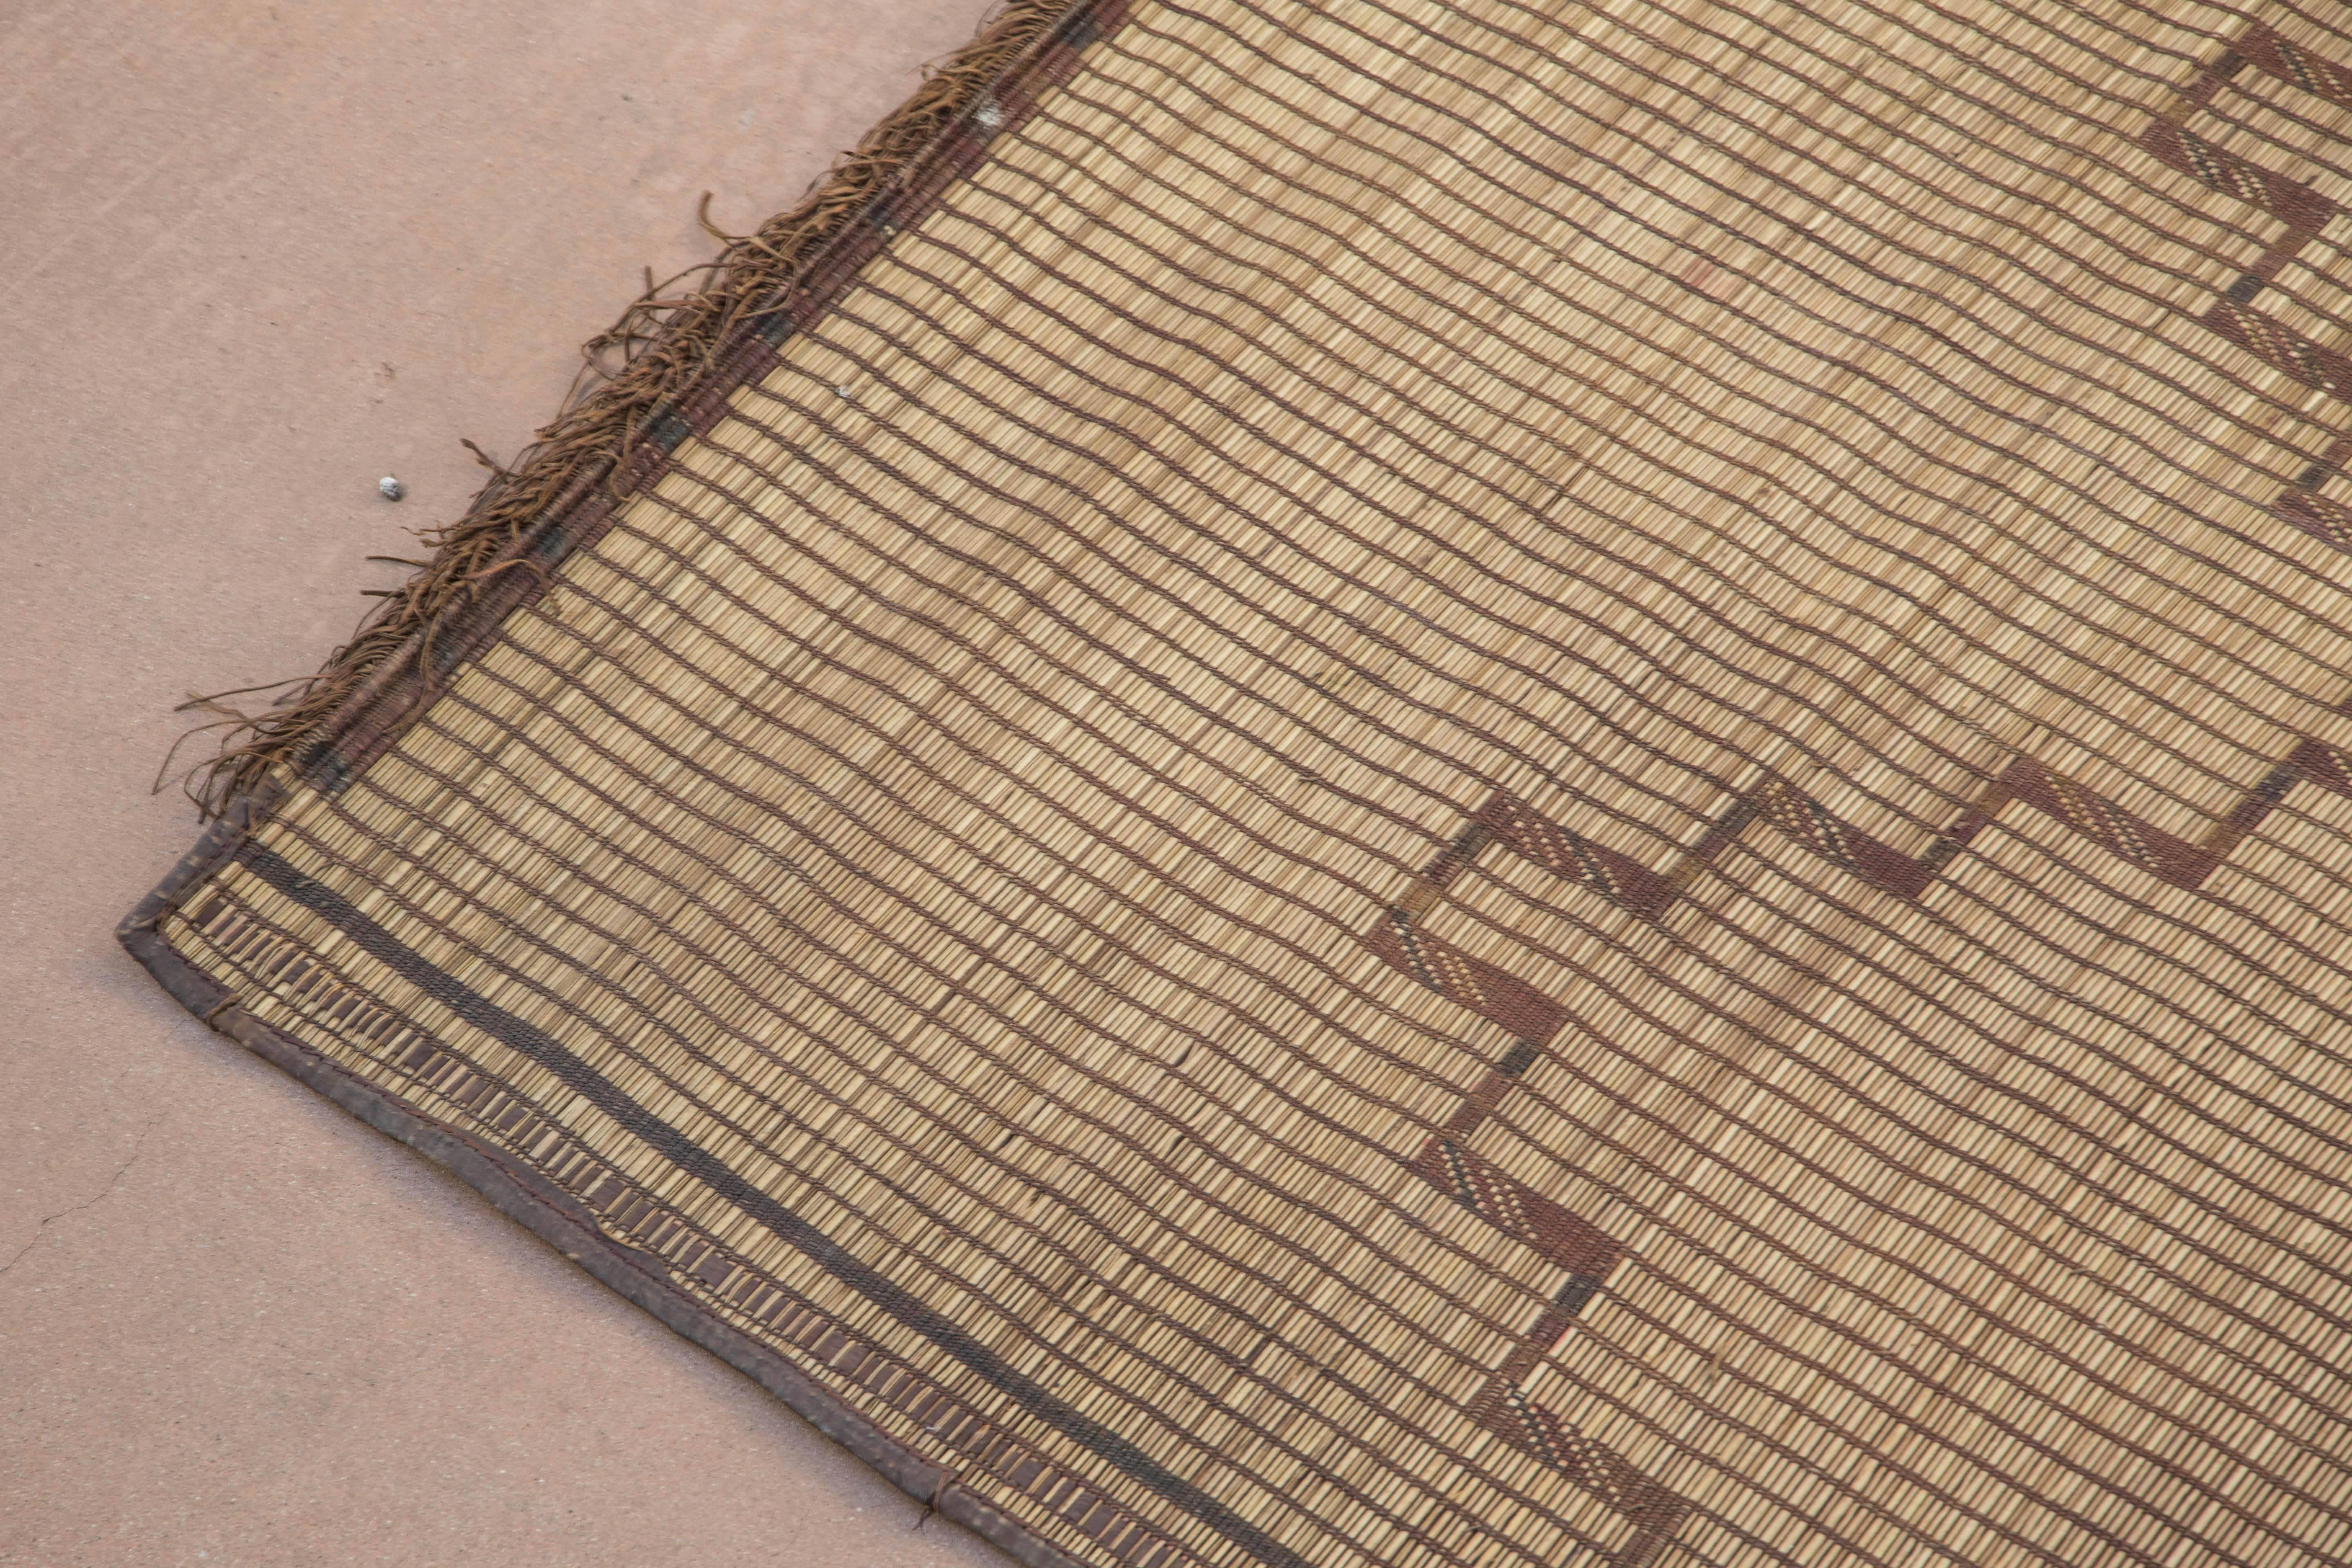 Moroccan Tuareg leather mats are made of dwarf palm tree fibers and hand-woven with leather stripes, this are great to use indoor or outdoor, beautiful brown earth-tone colors. This vintage mid century carpets are made in the desert of Morocco near